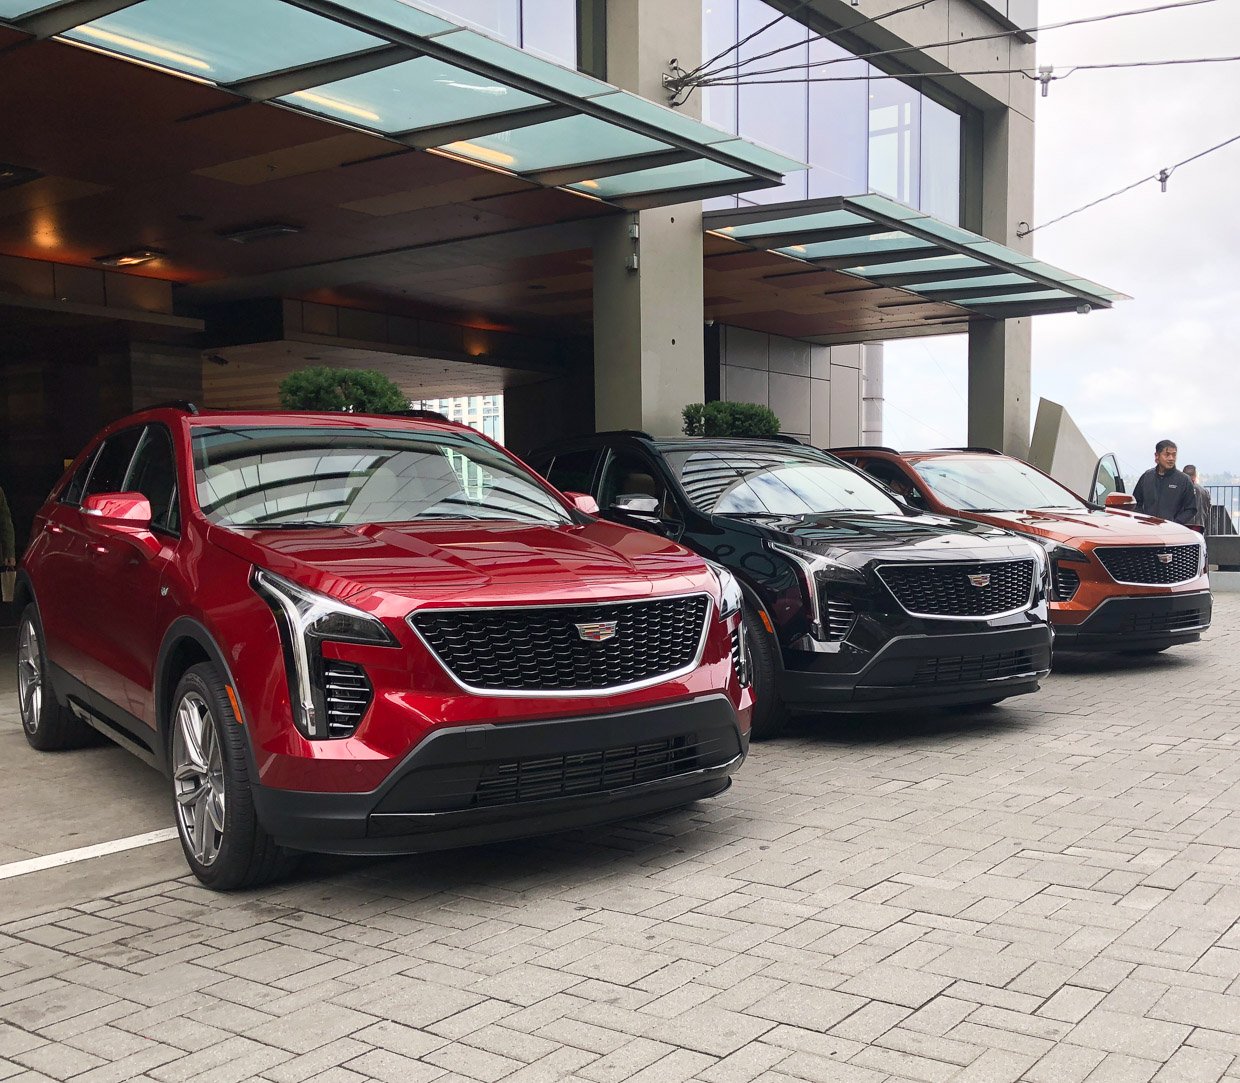 2019 Cadillac XT4 First Drive Review: A Compelling Caddy Compact CUV